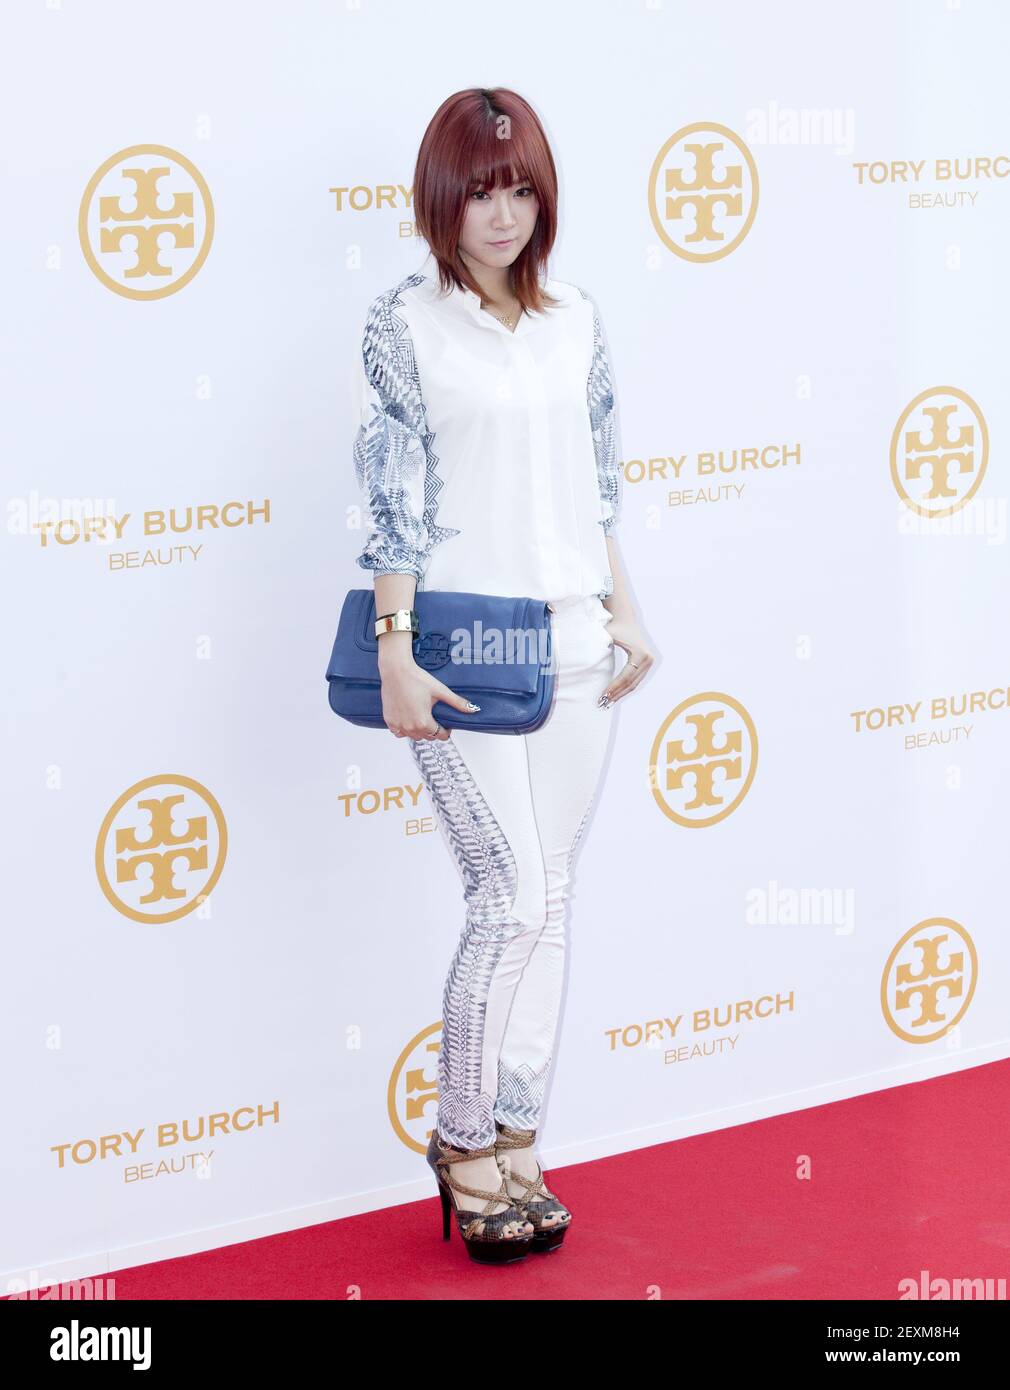 26 February 2014 - Seoul, South Korea : South Korean Soyu, member of K-Pop  girl group Sistar, attends a photo call for the . fashion brand Tory  Burch perfume launching event at